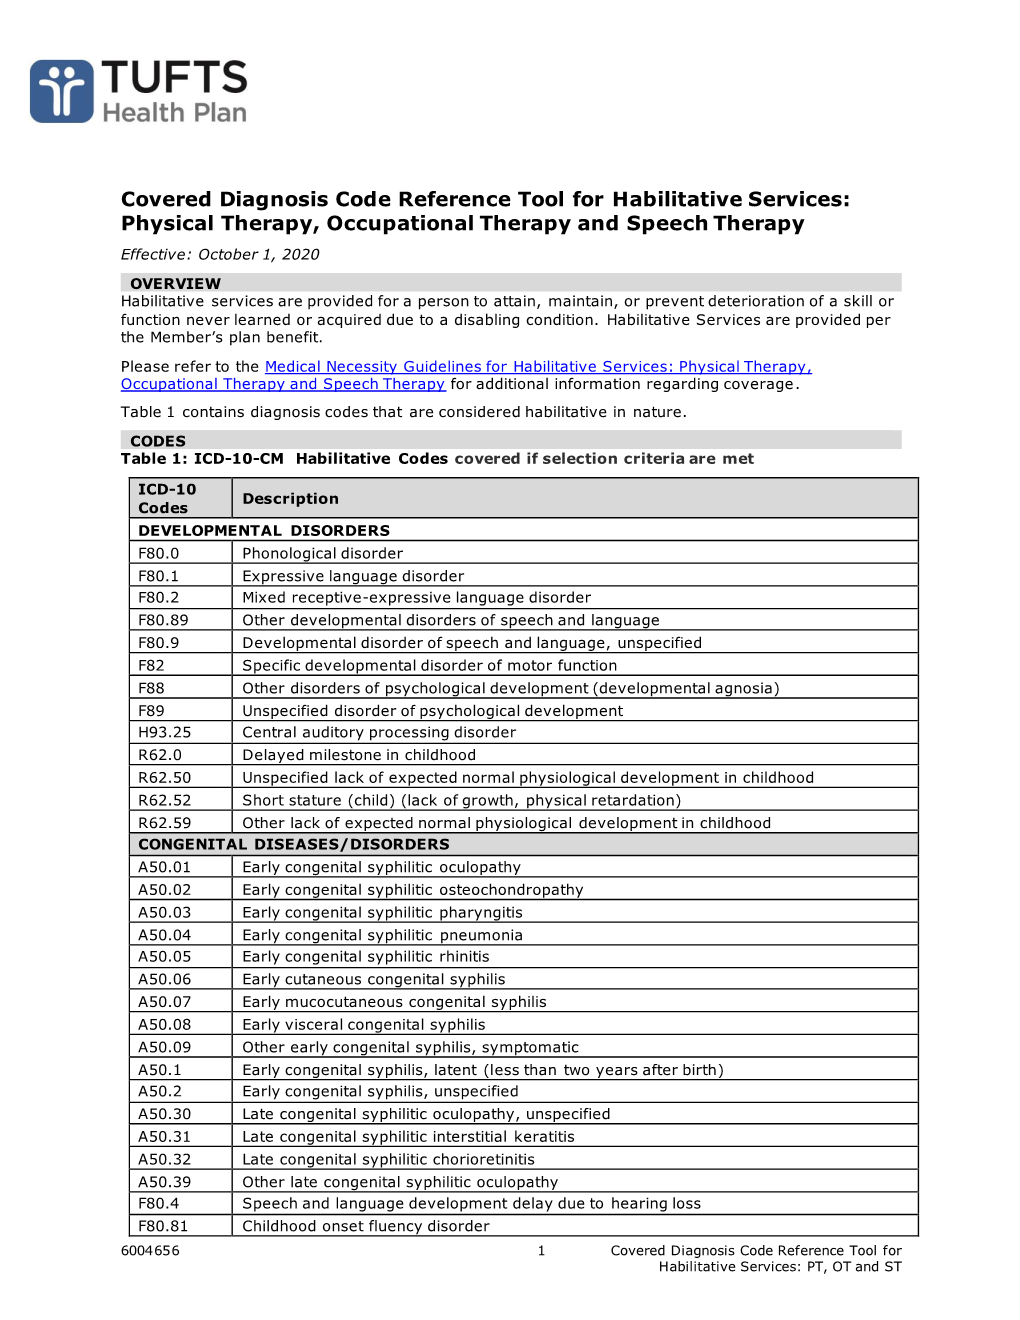 Covered Diagnosis Code Reference Tool for Habilitative Services: Physical Therapy, Occupational Therapy and Speech Therapy Effective: October 1, 2020